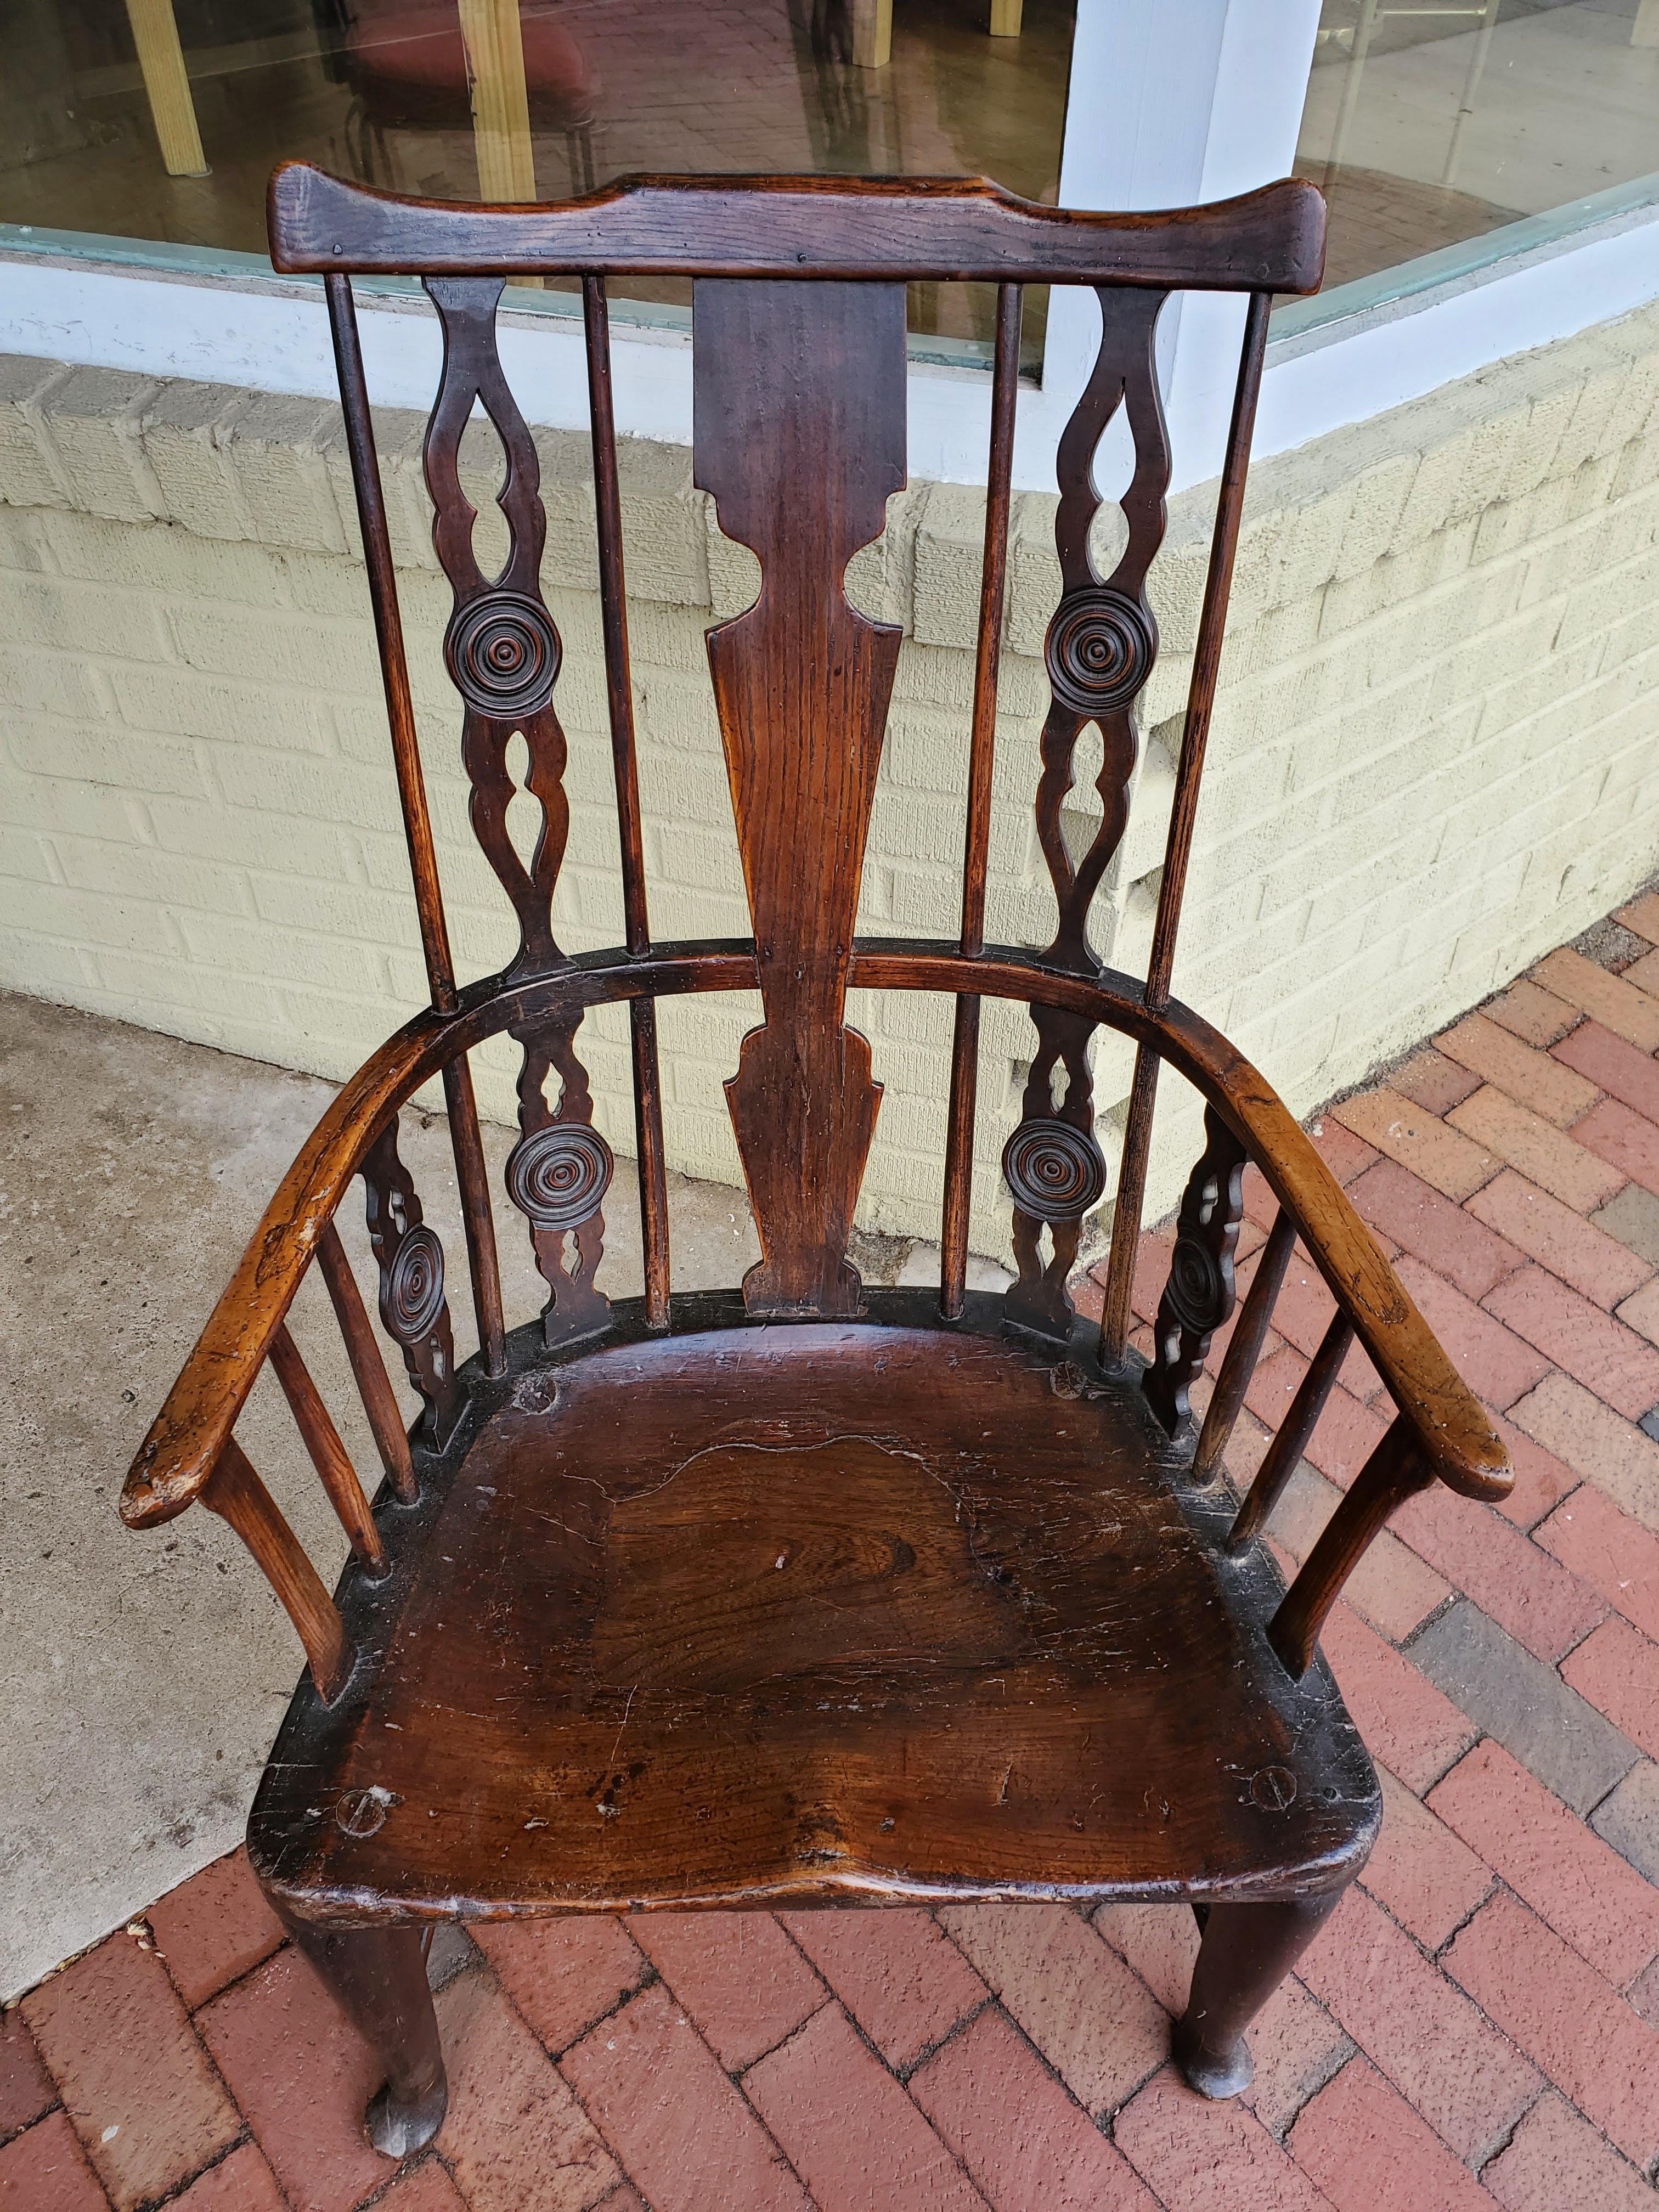 This rare early 18th century English “comb-back” Windsor armchair, made of ash, elm, and walnut, has a beautifully deep lustrous color. Delicate spindles with five uniquely shaped splats with pierced and turned decoration. Elegant curved arms over